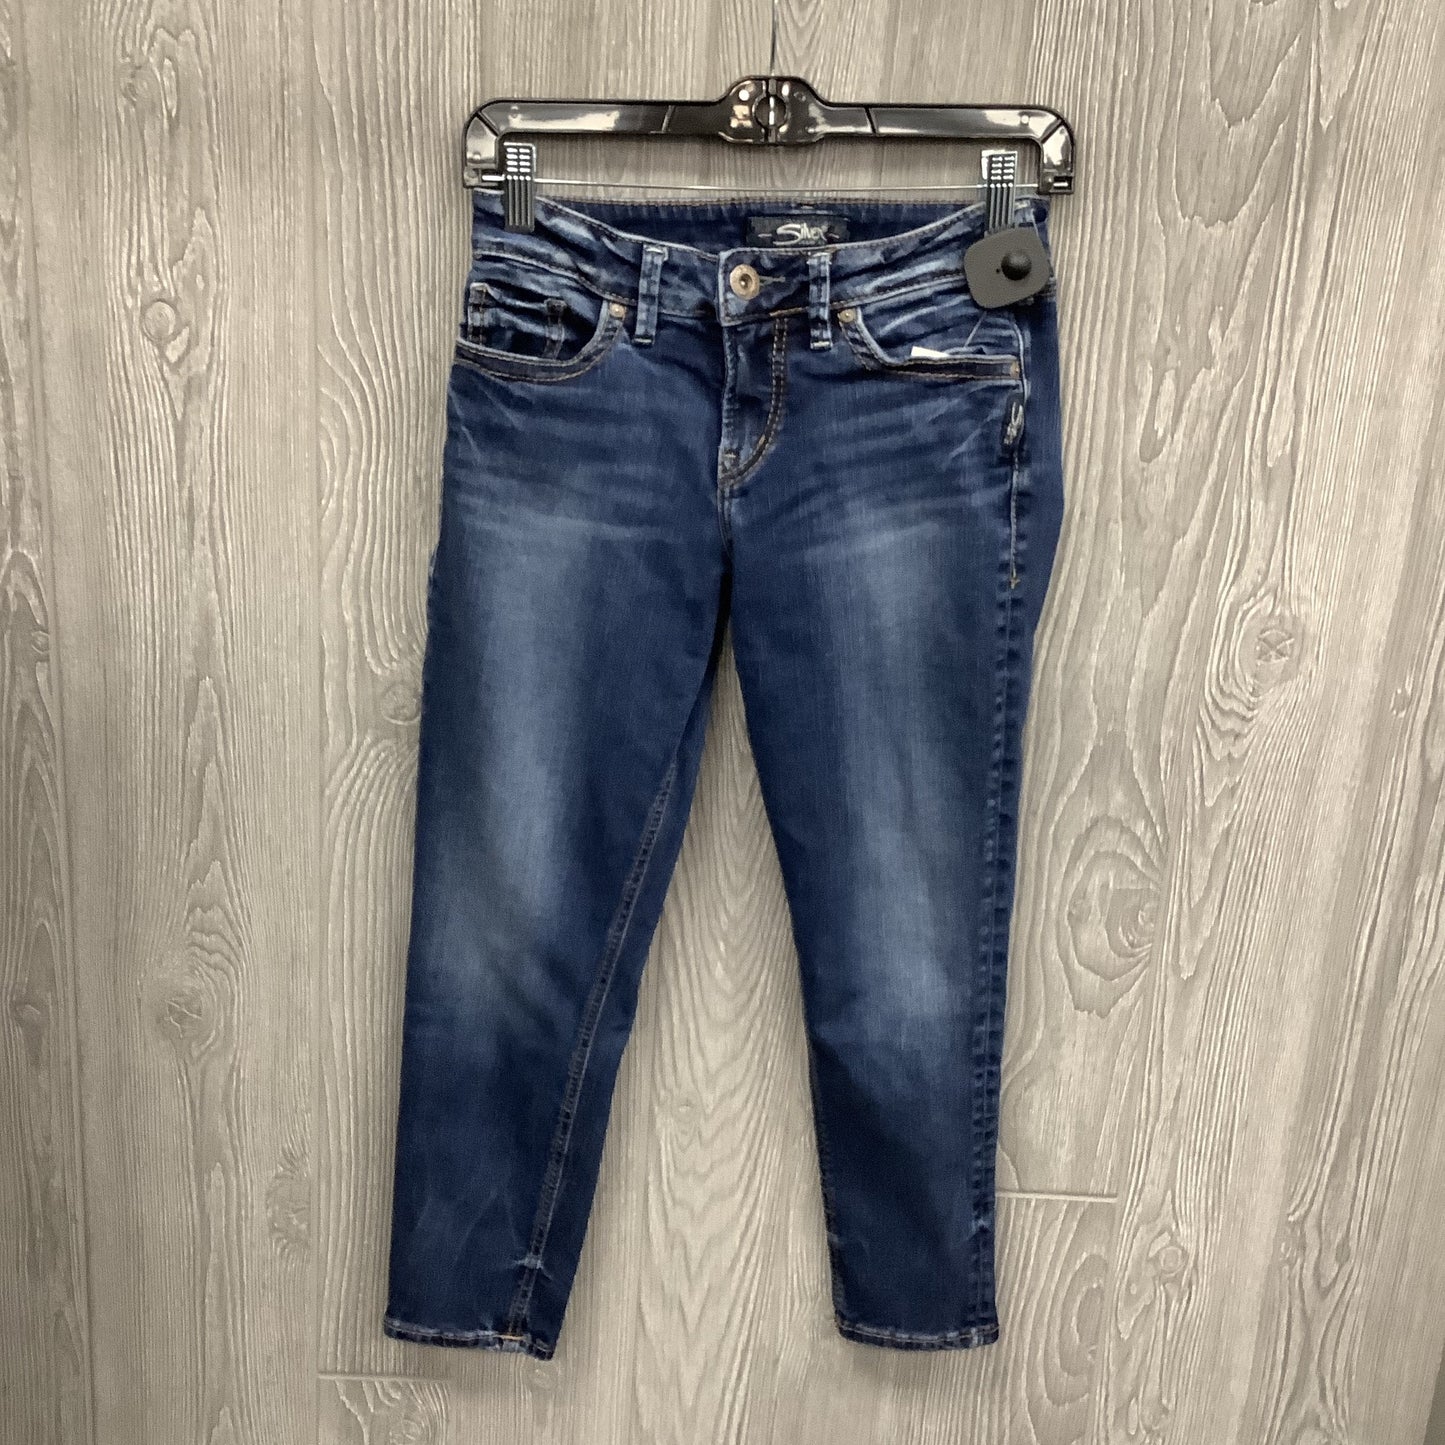 JEANS BY SILVER SIZE 4